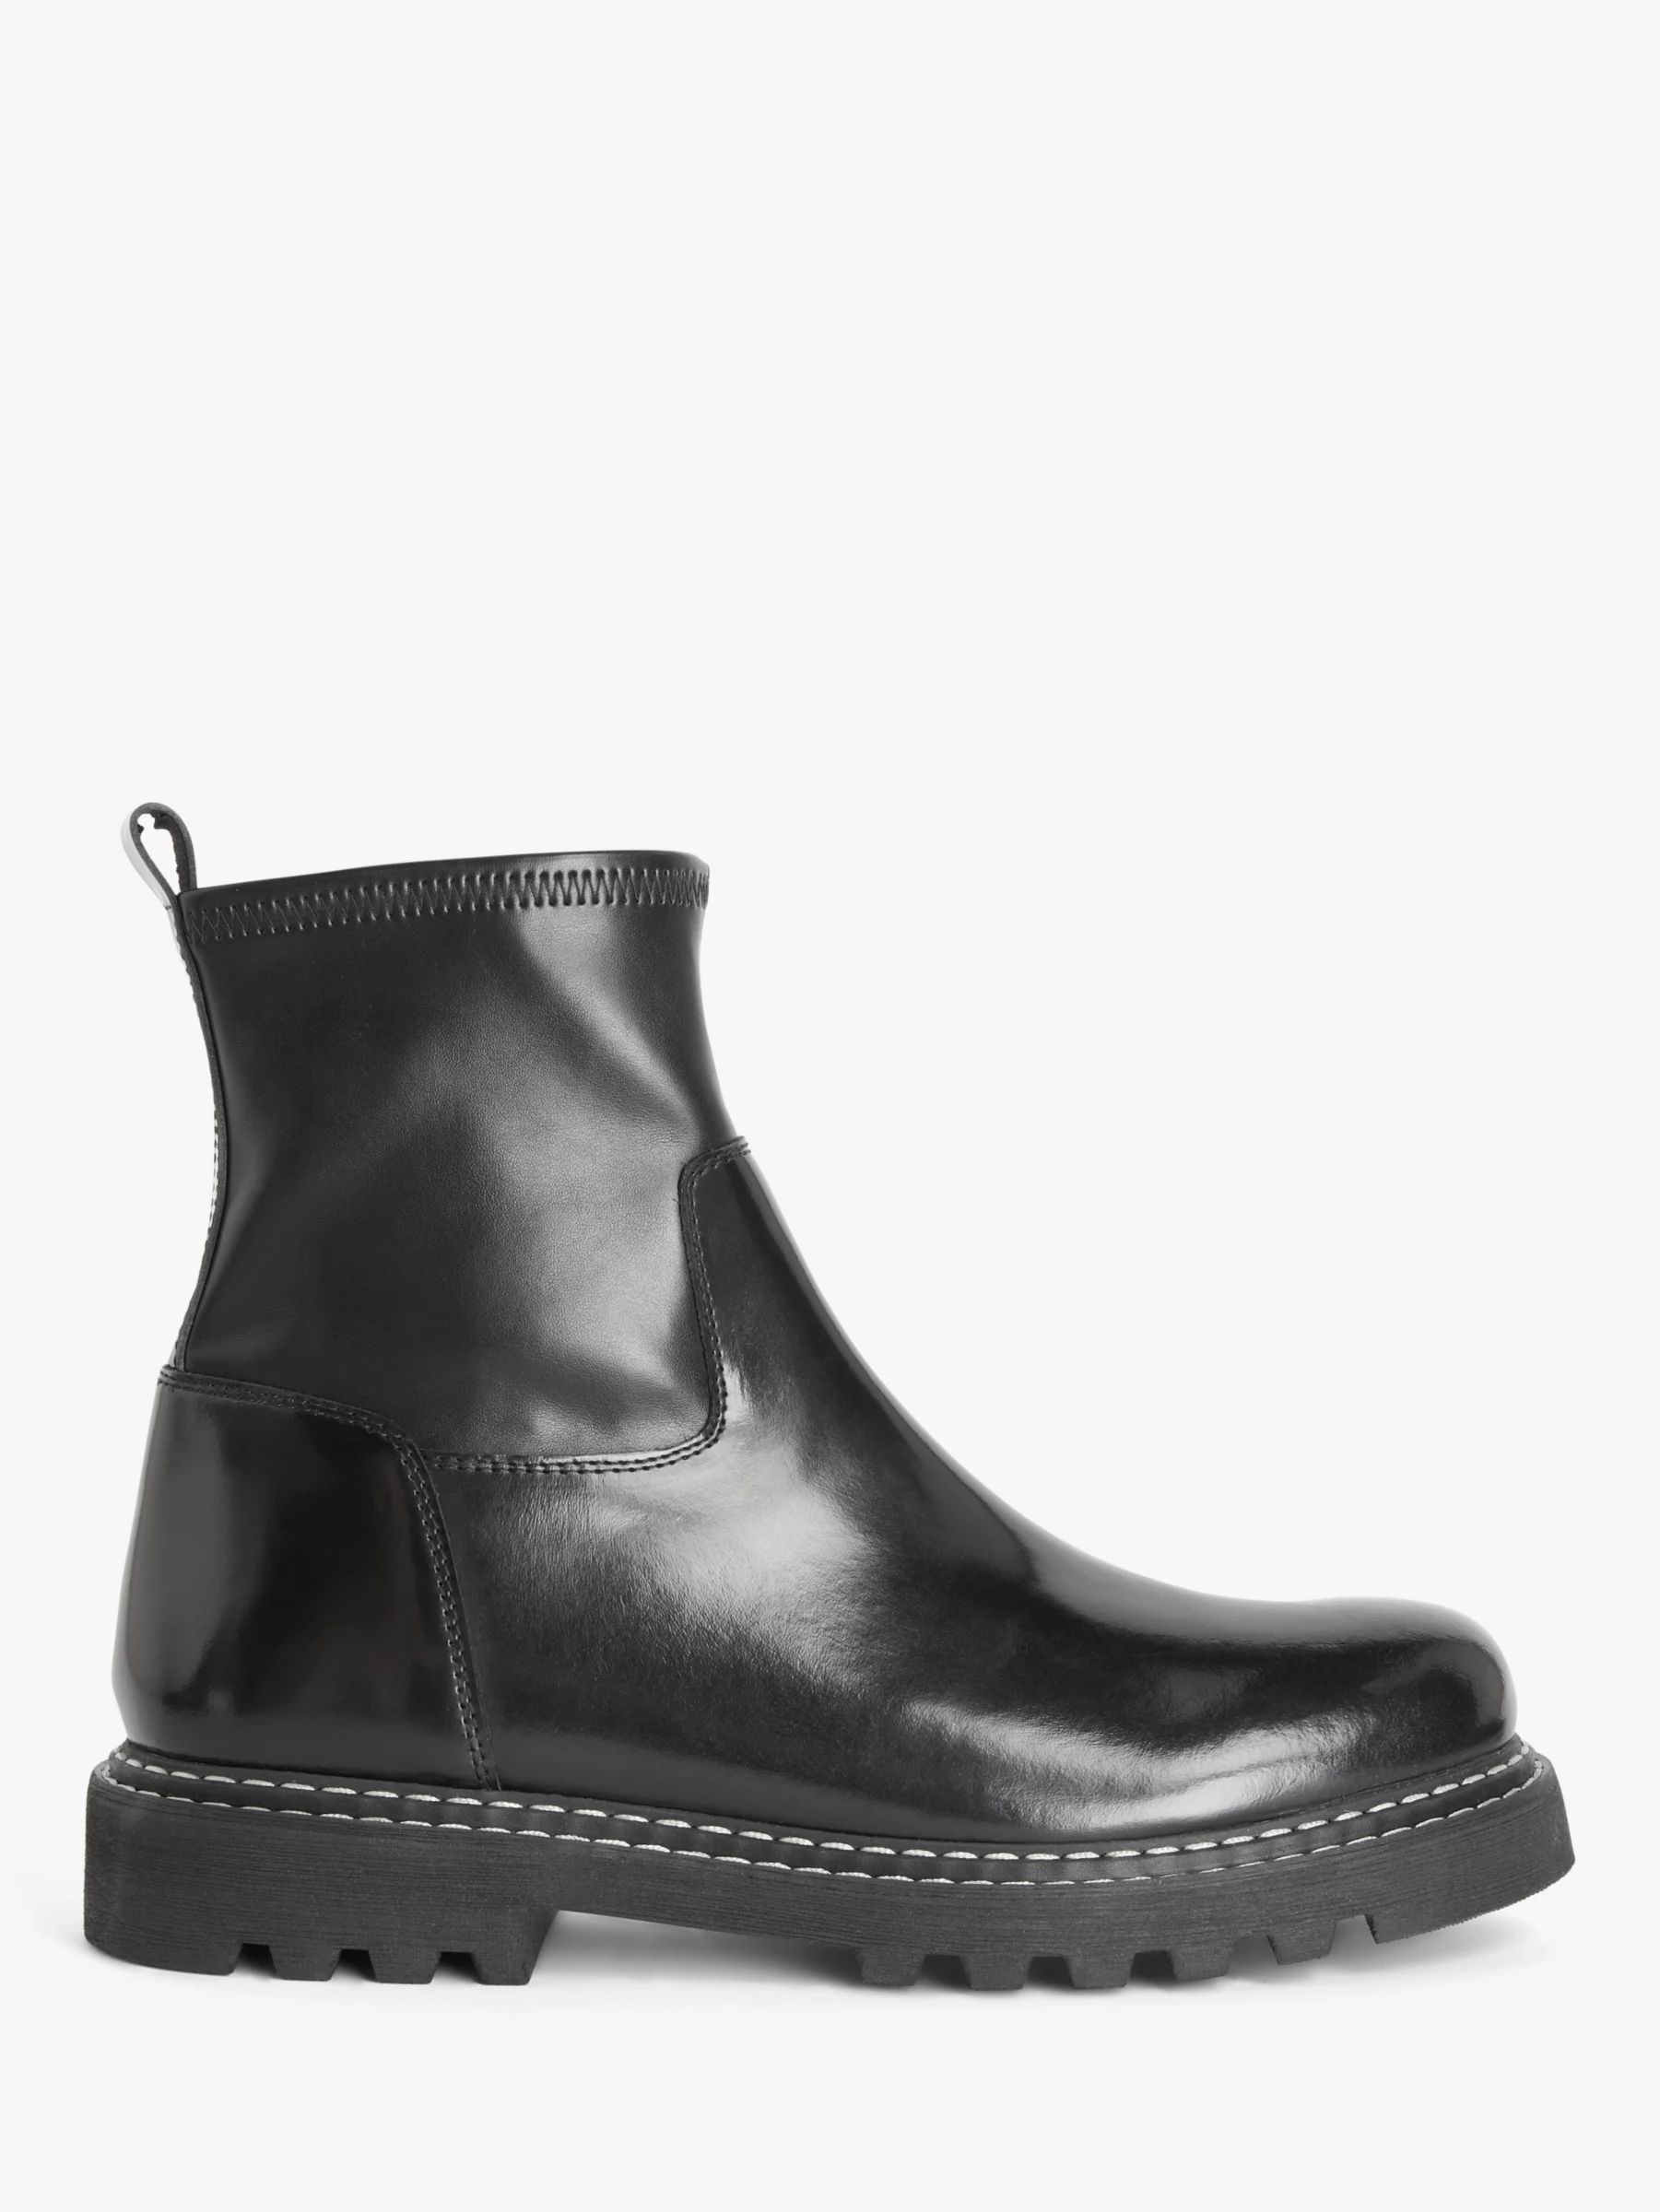 Kin Perelle 2 Leather Chunky Cleated Stretch Ankle Boots, Black | John Lewis (UK)